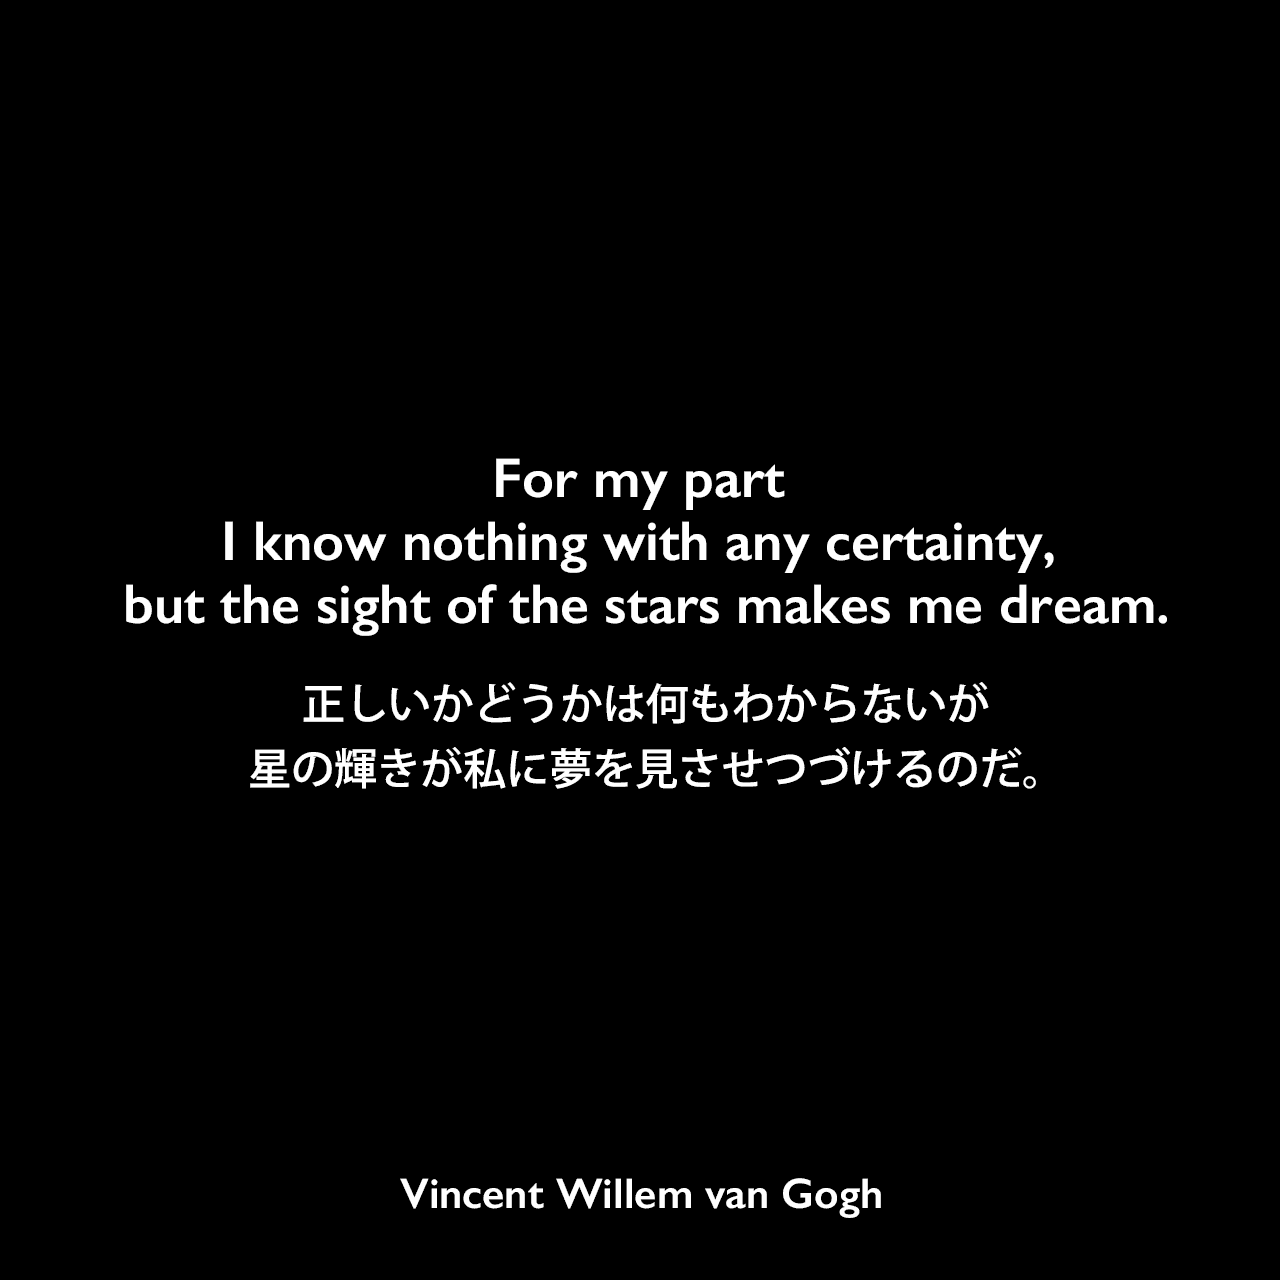 For my part I know nothing with any certainty, but the sight of the stars makes me dream.正しいかどうかは何もわからないが、星の輝きが私に夢を見させつづけるのだ。Vincent Willem van Gogh